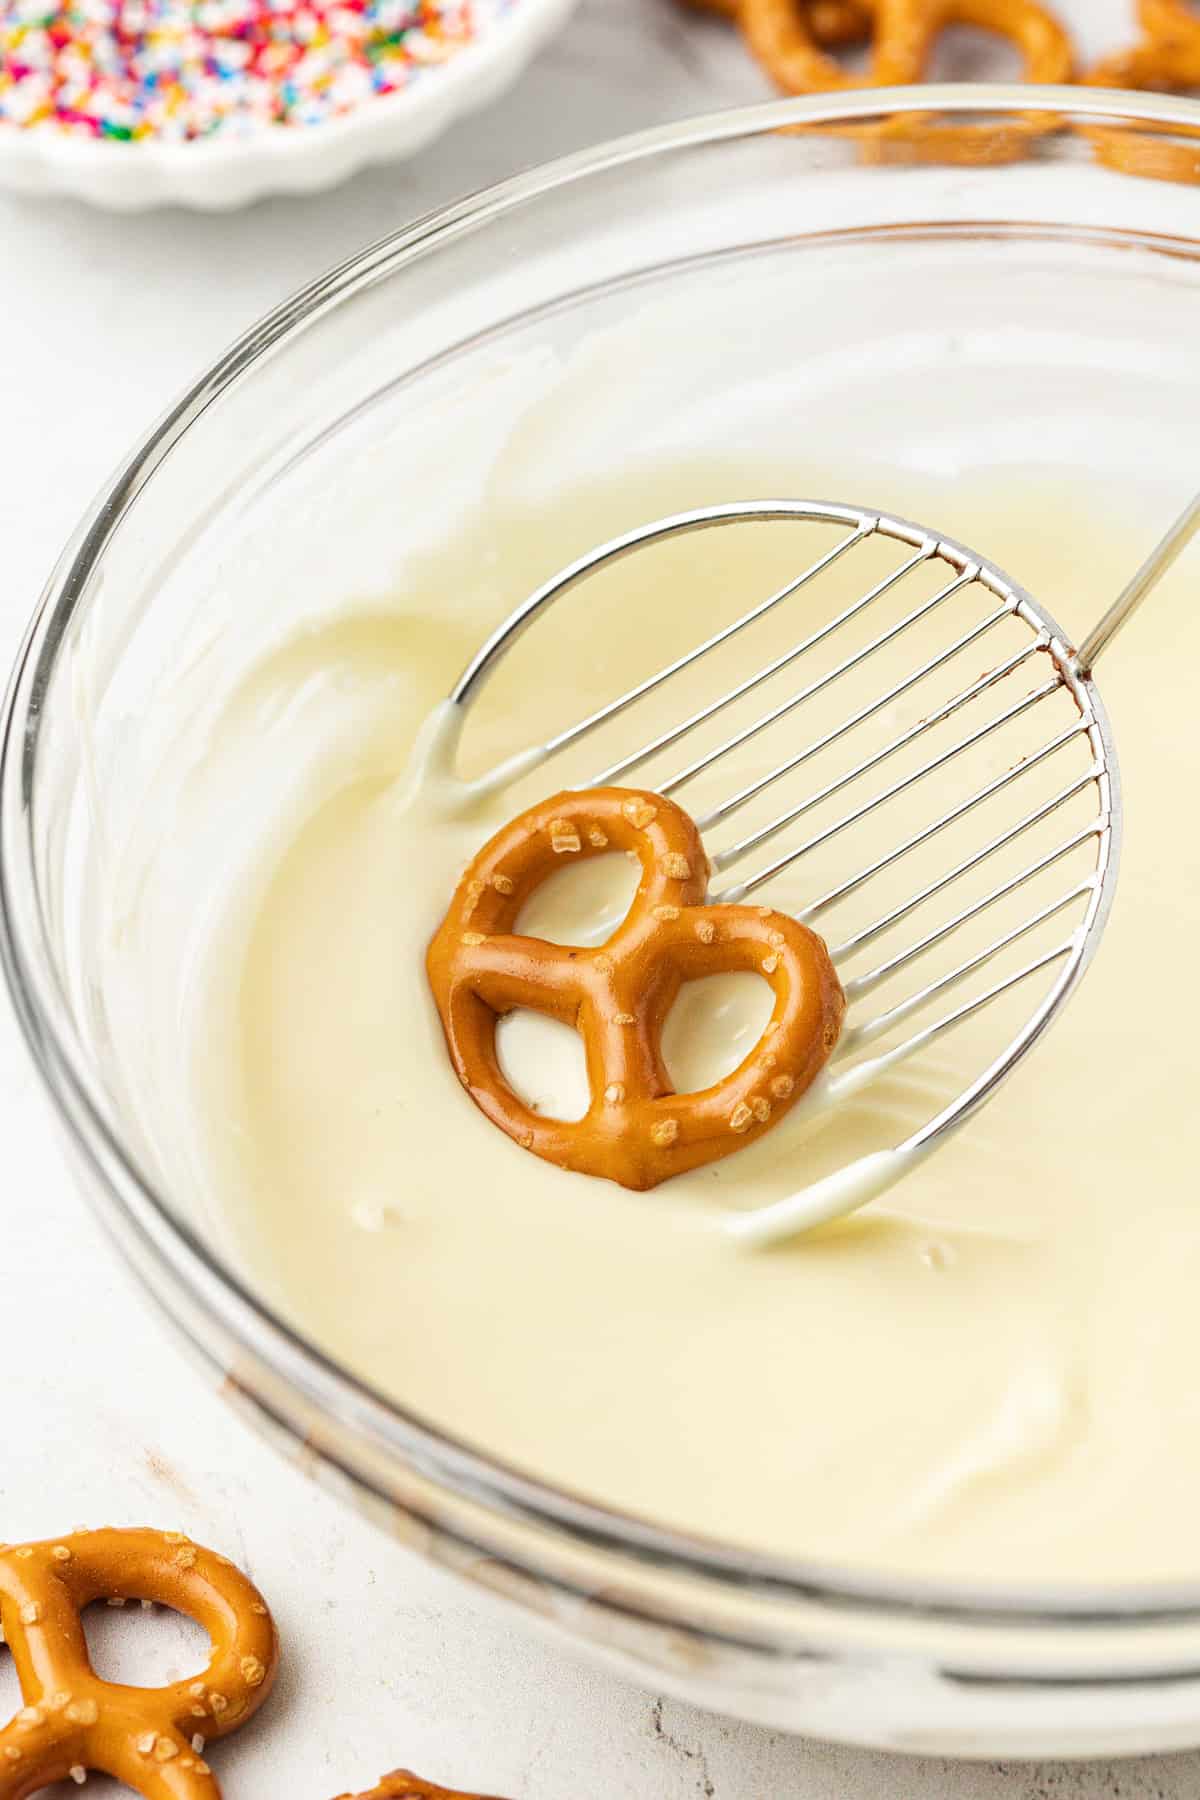 a twist pretzel being dipped into a clear glass bowl of white chocolate with more pretzels scattered around and a bowl of rainbow sprinkles in the background